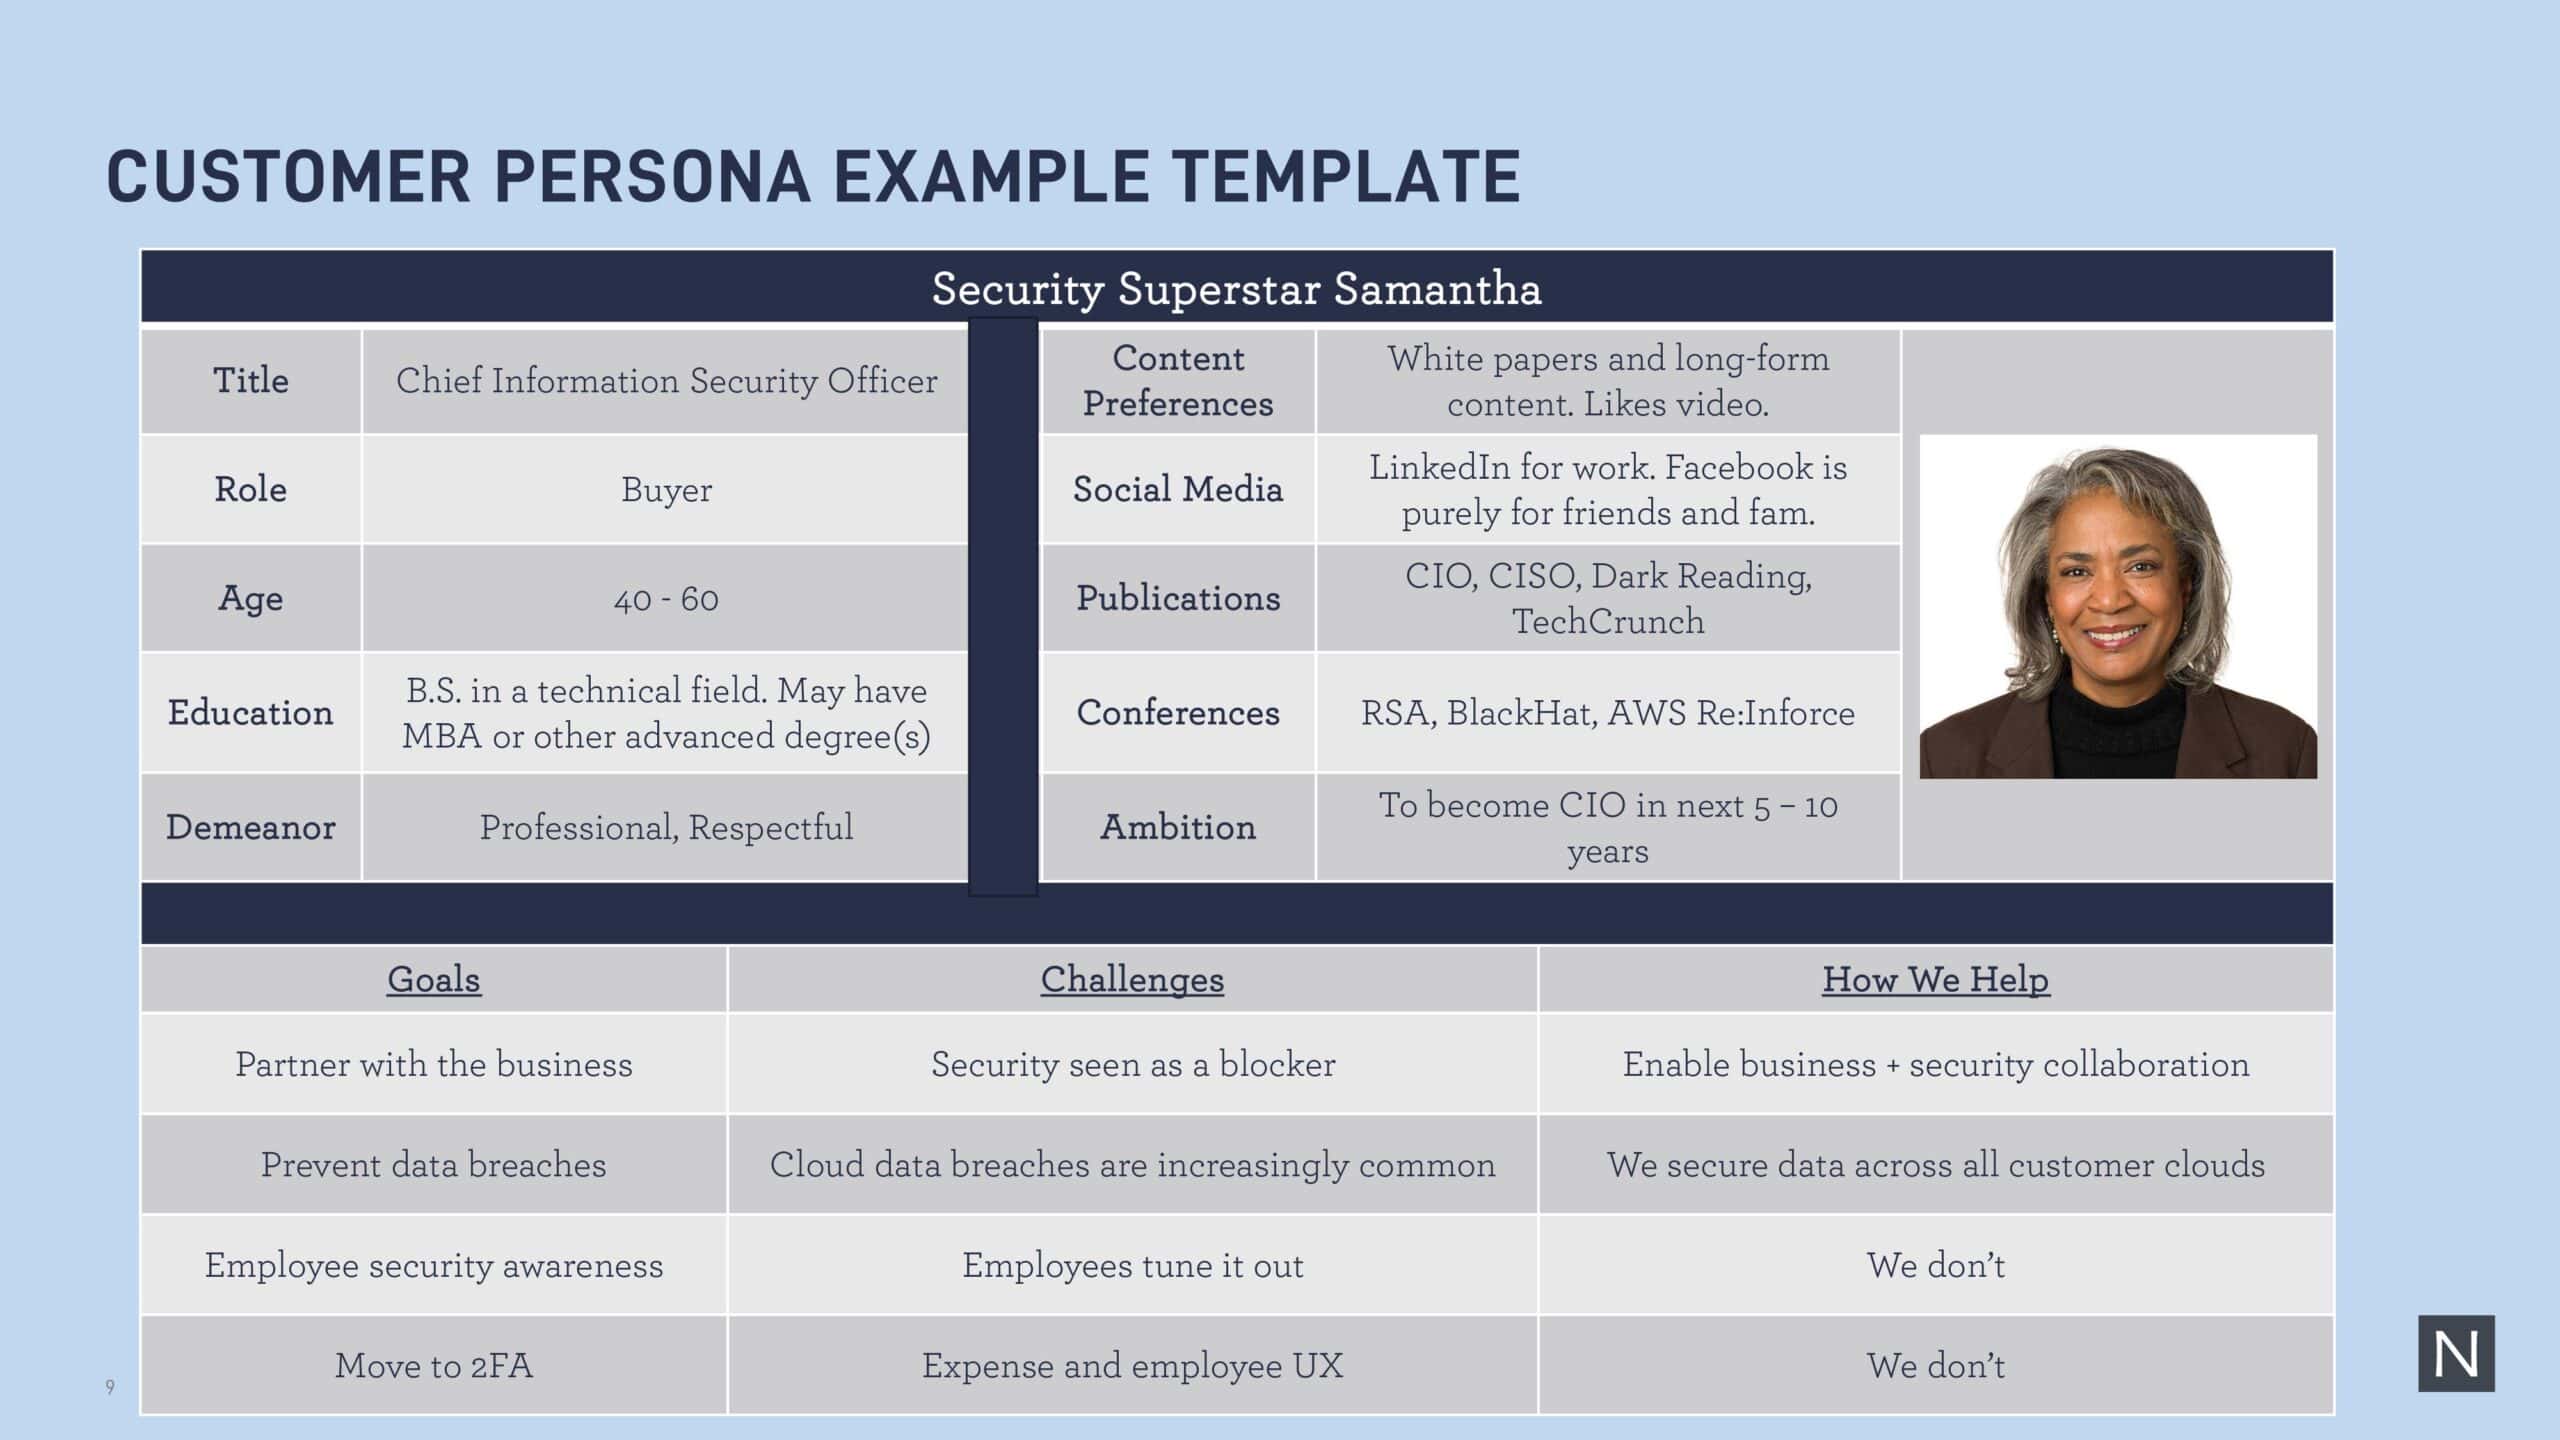 An example of a customer persona template for a Chief Information Security Officer